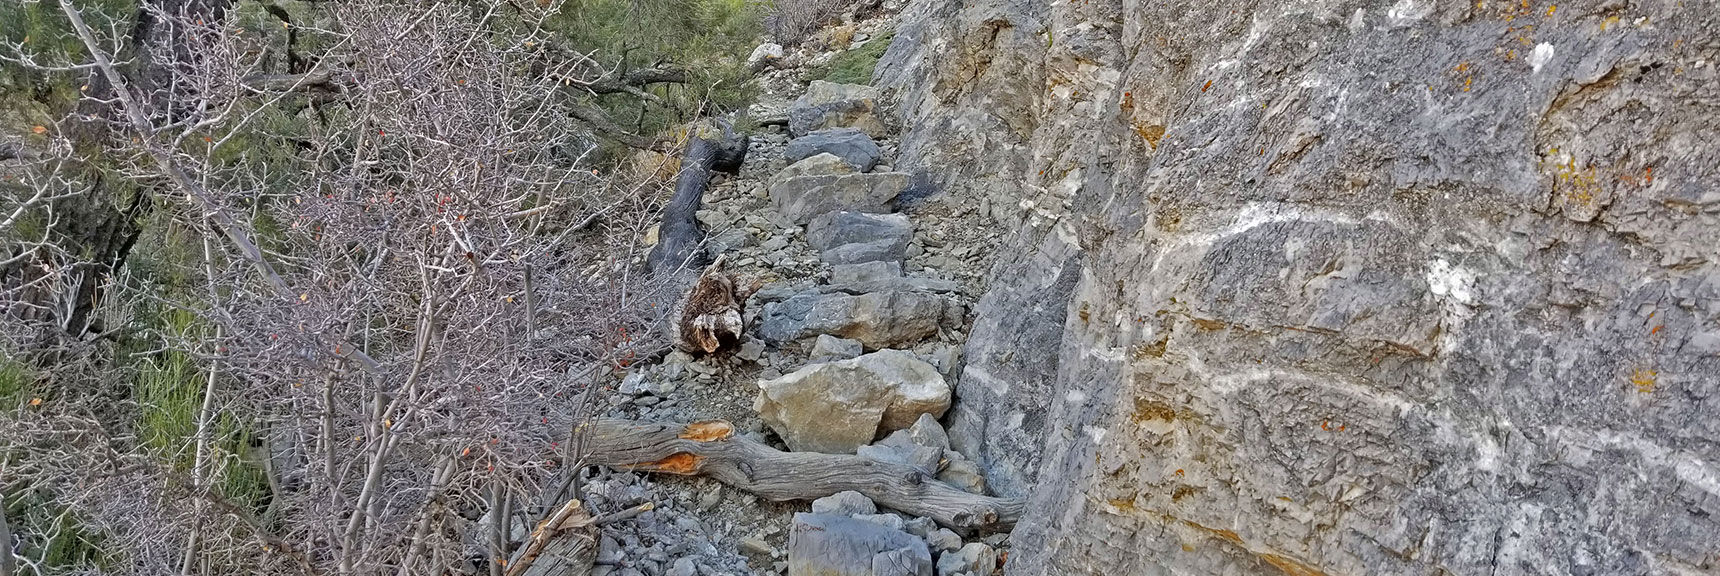 Well Constructed Rock Stairway on Potosi Mt Northern Cliffs Trail. Took a Lot of Heavy Work! | Potosi Mountain Northern Cliffs Trail | Spring Mountains, Nevada